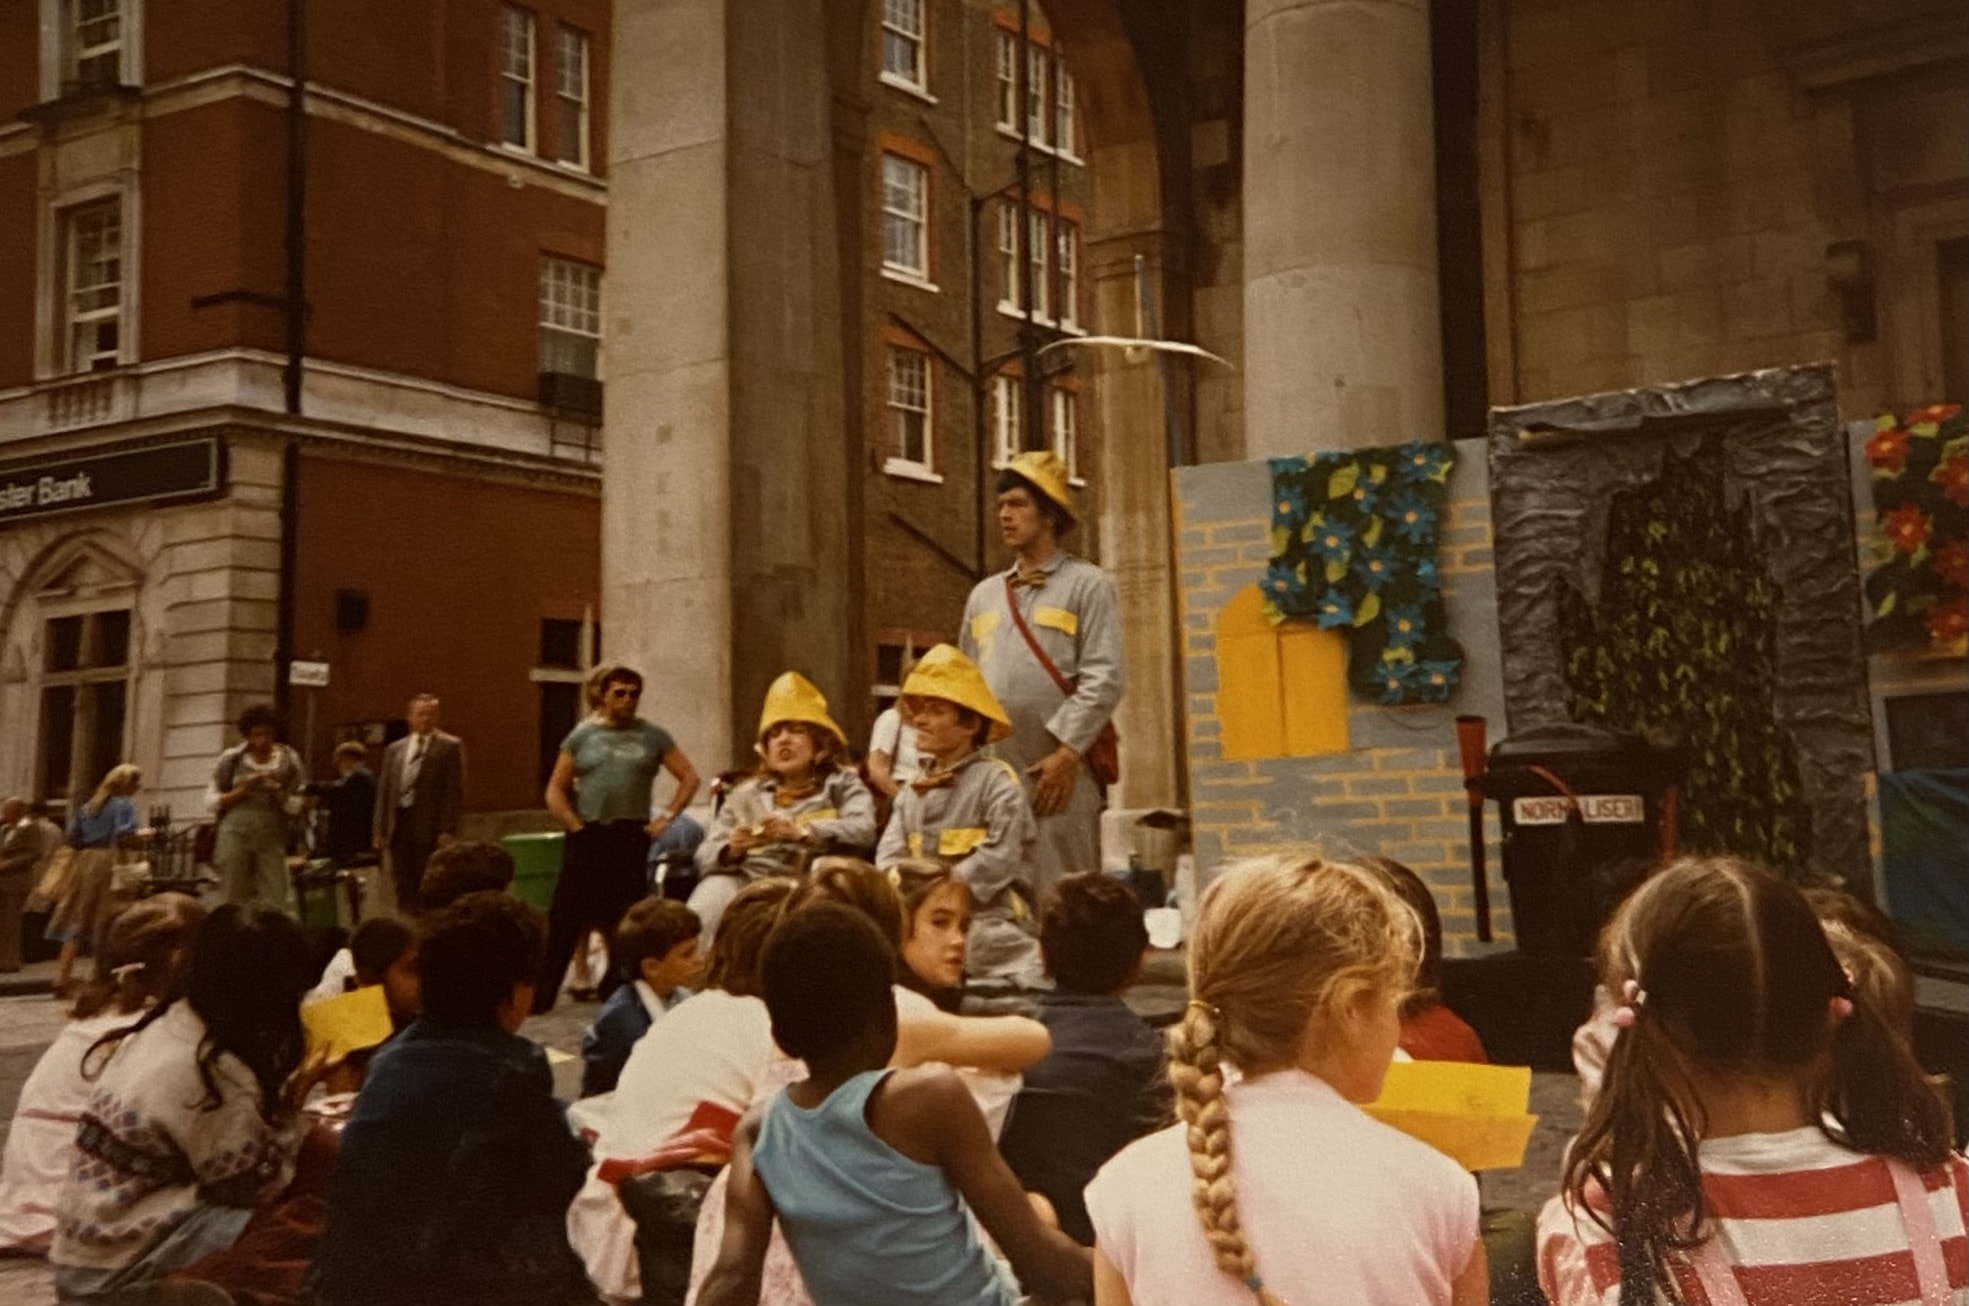 A gathering of people, some in yellow construction helmets.